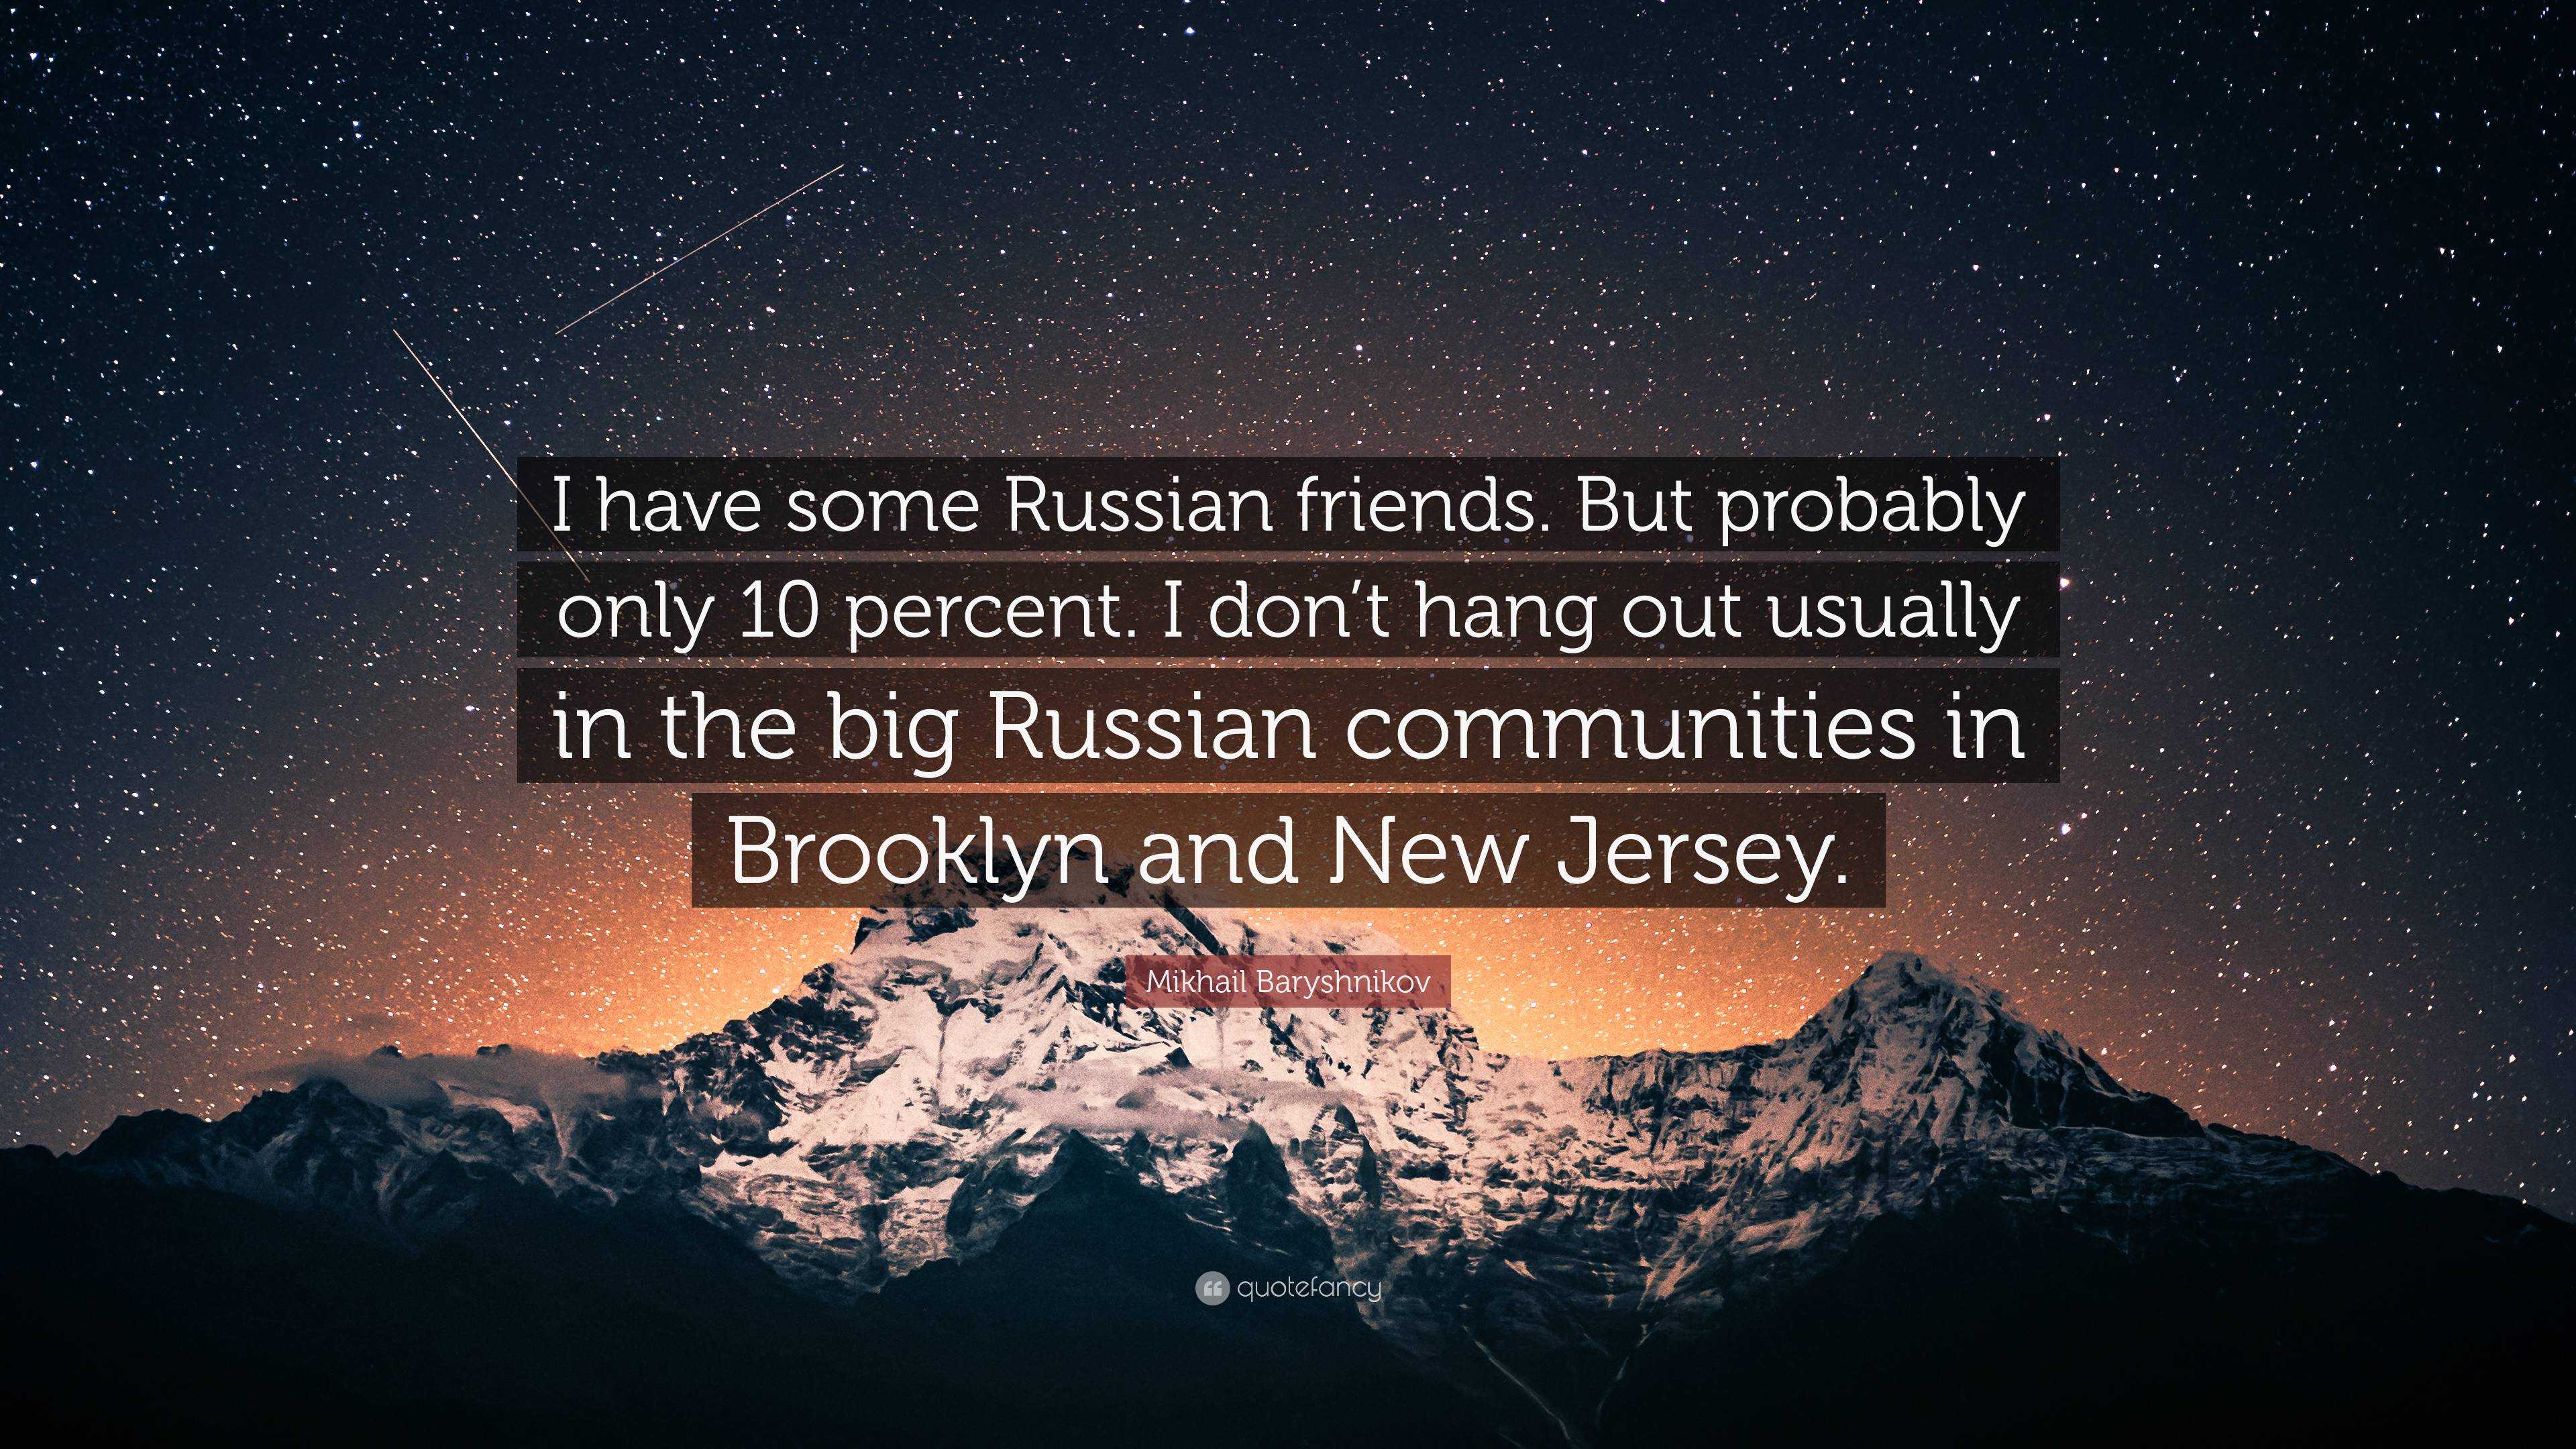 Mikhail Baryshnikov Quote: “I have some Russian friends. But probably only  10 percent. I don't hang out usually in the big Russian communities in  Br...”